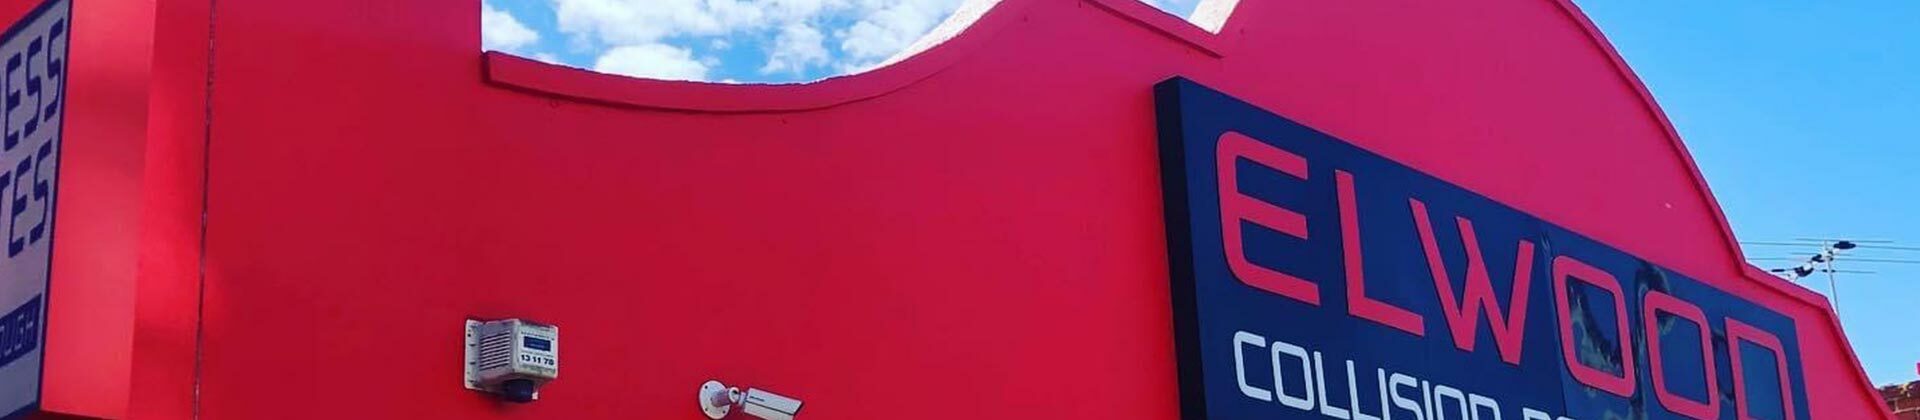 infill-clad-rendered-facade-in-red-by-chad-banner